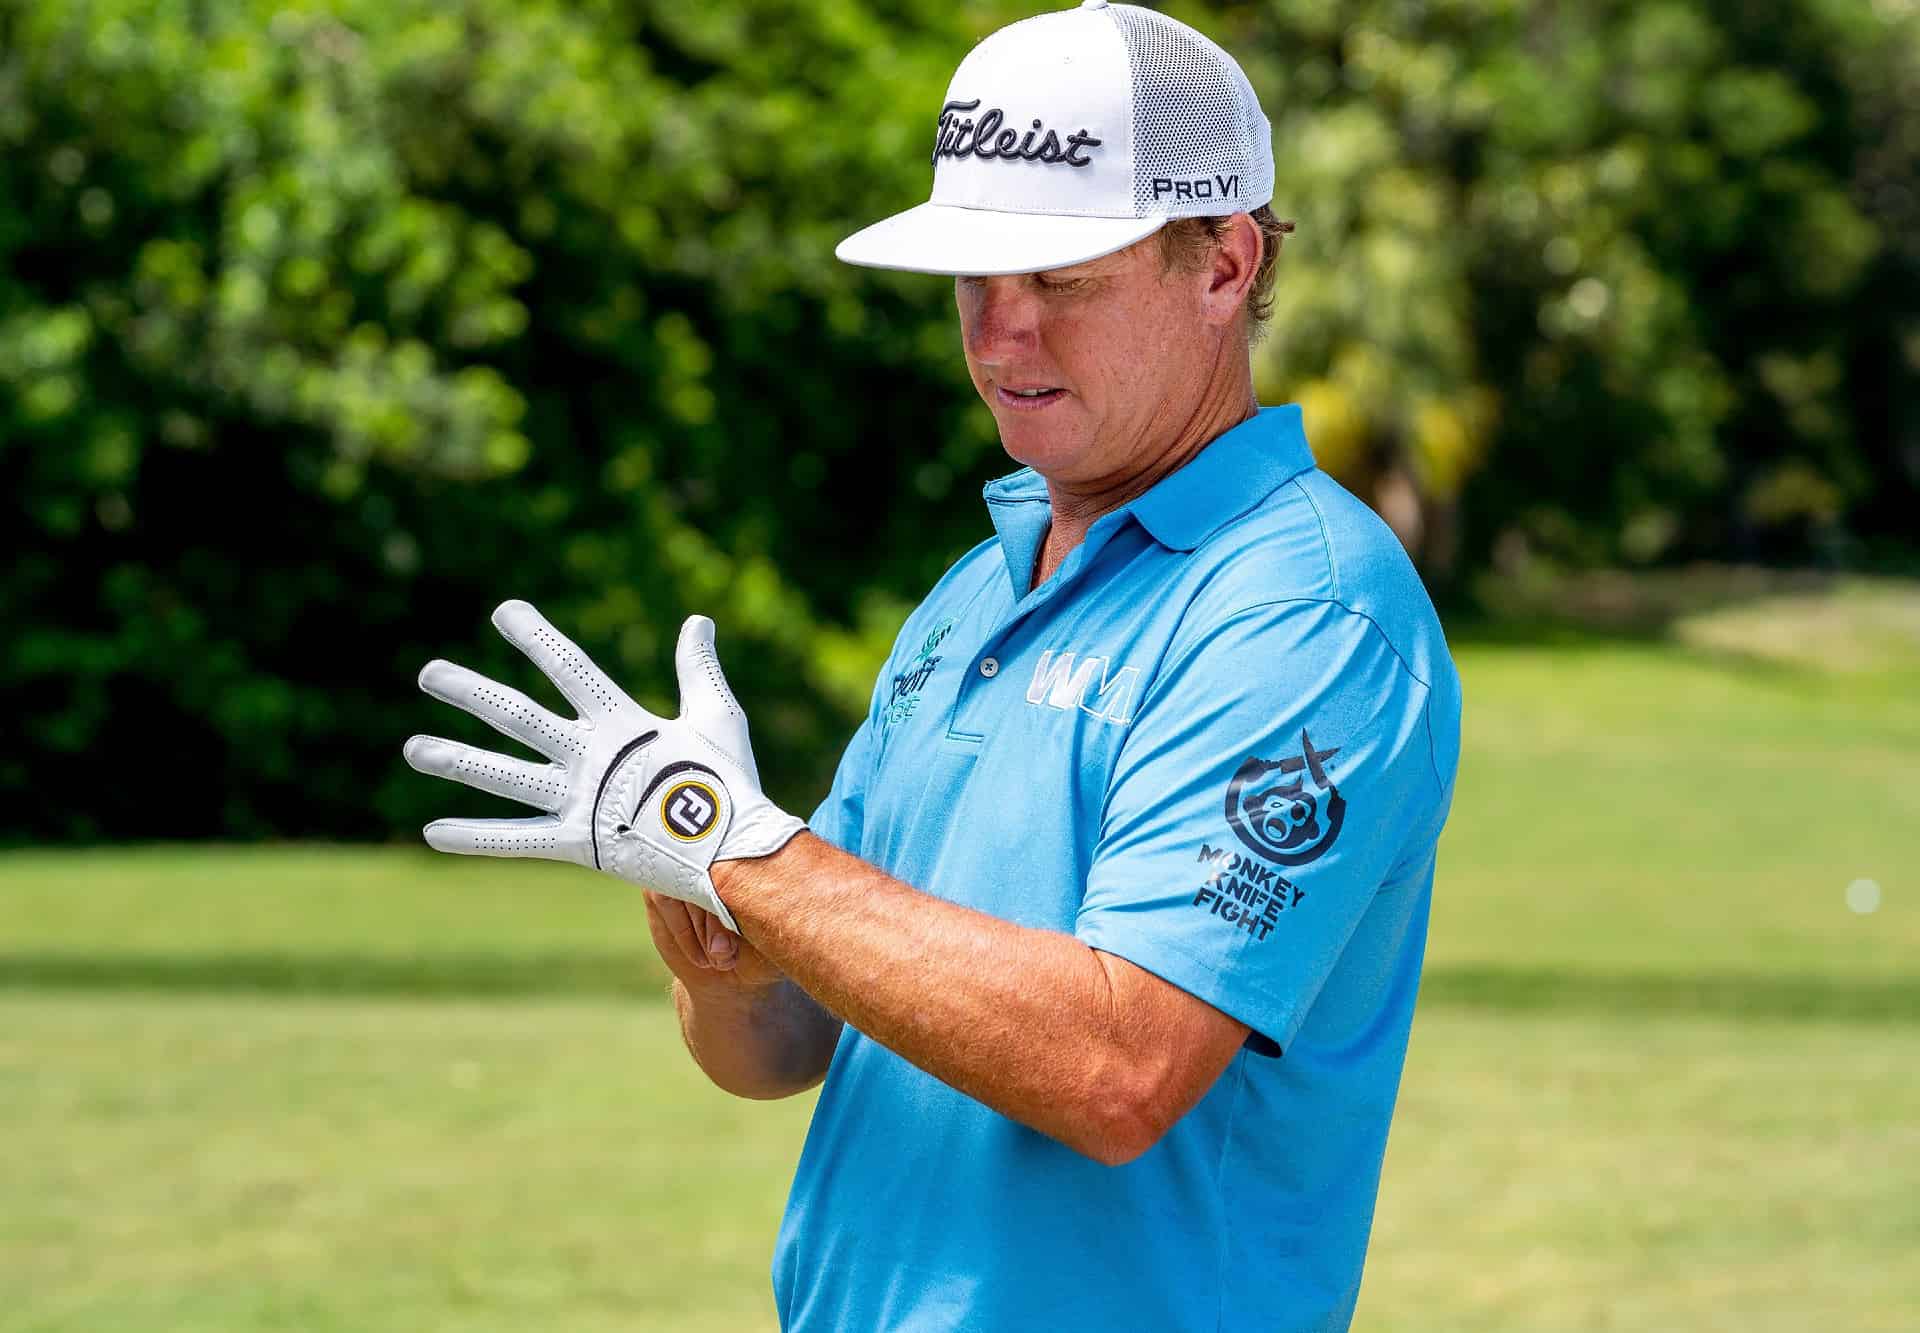 WIN! A year's supply of FootJoy StaSof gloves